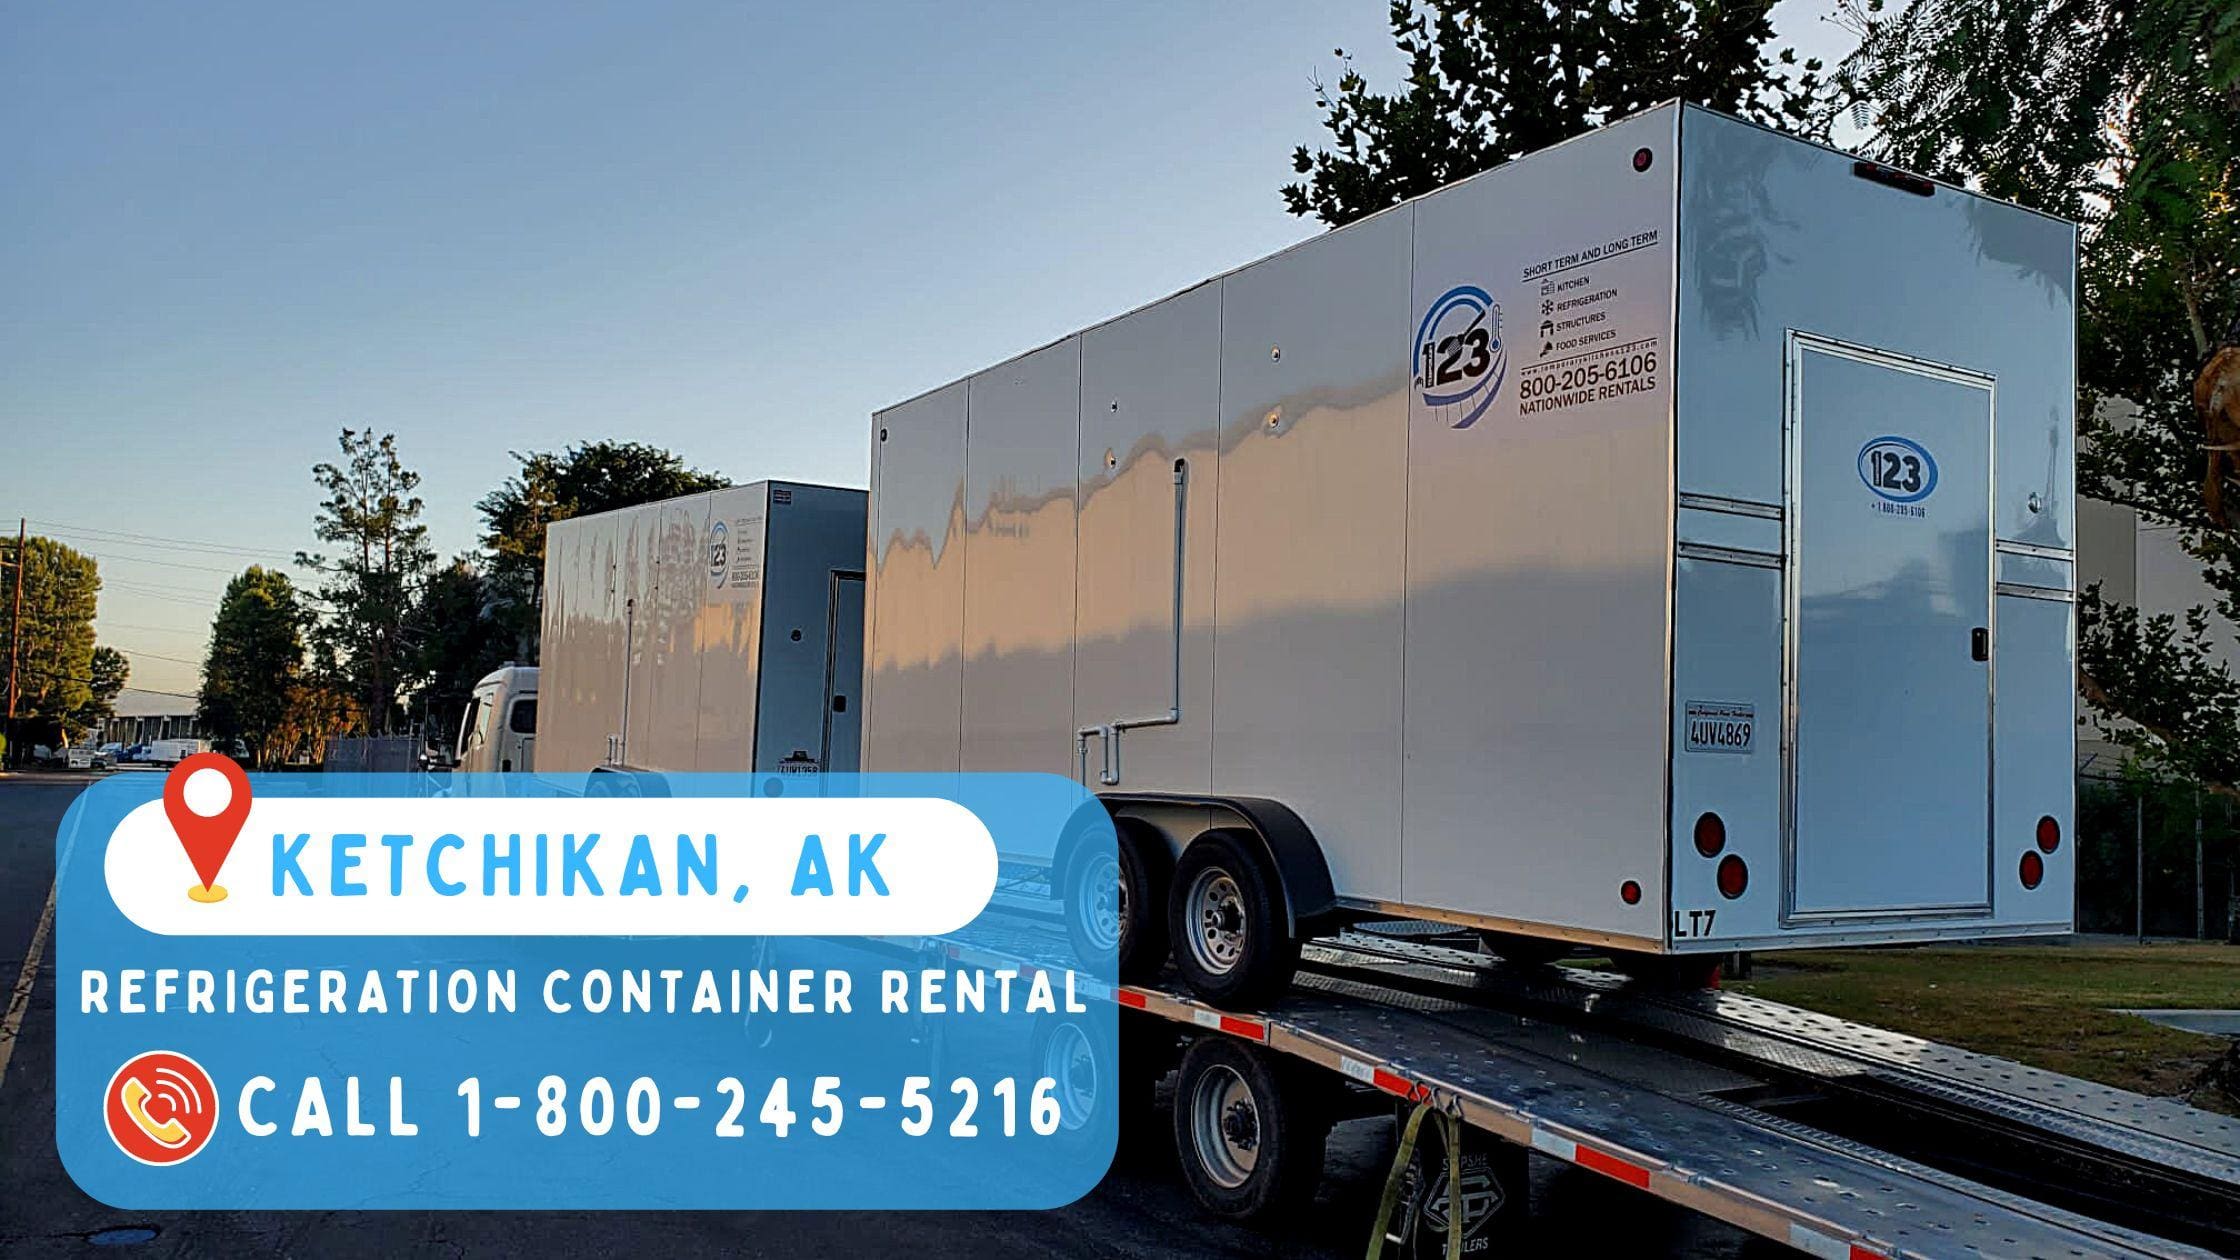 Refrigeration Container Rental in Ketchikan